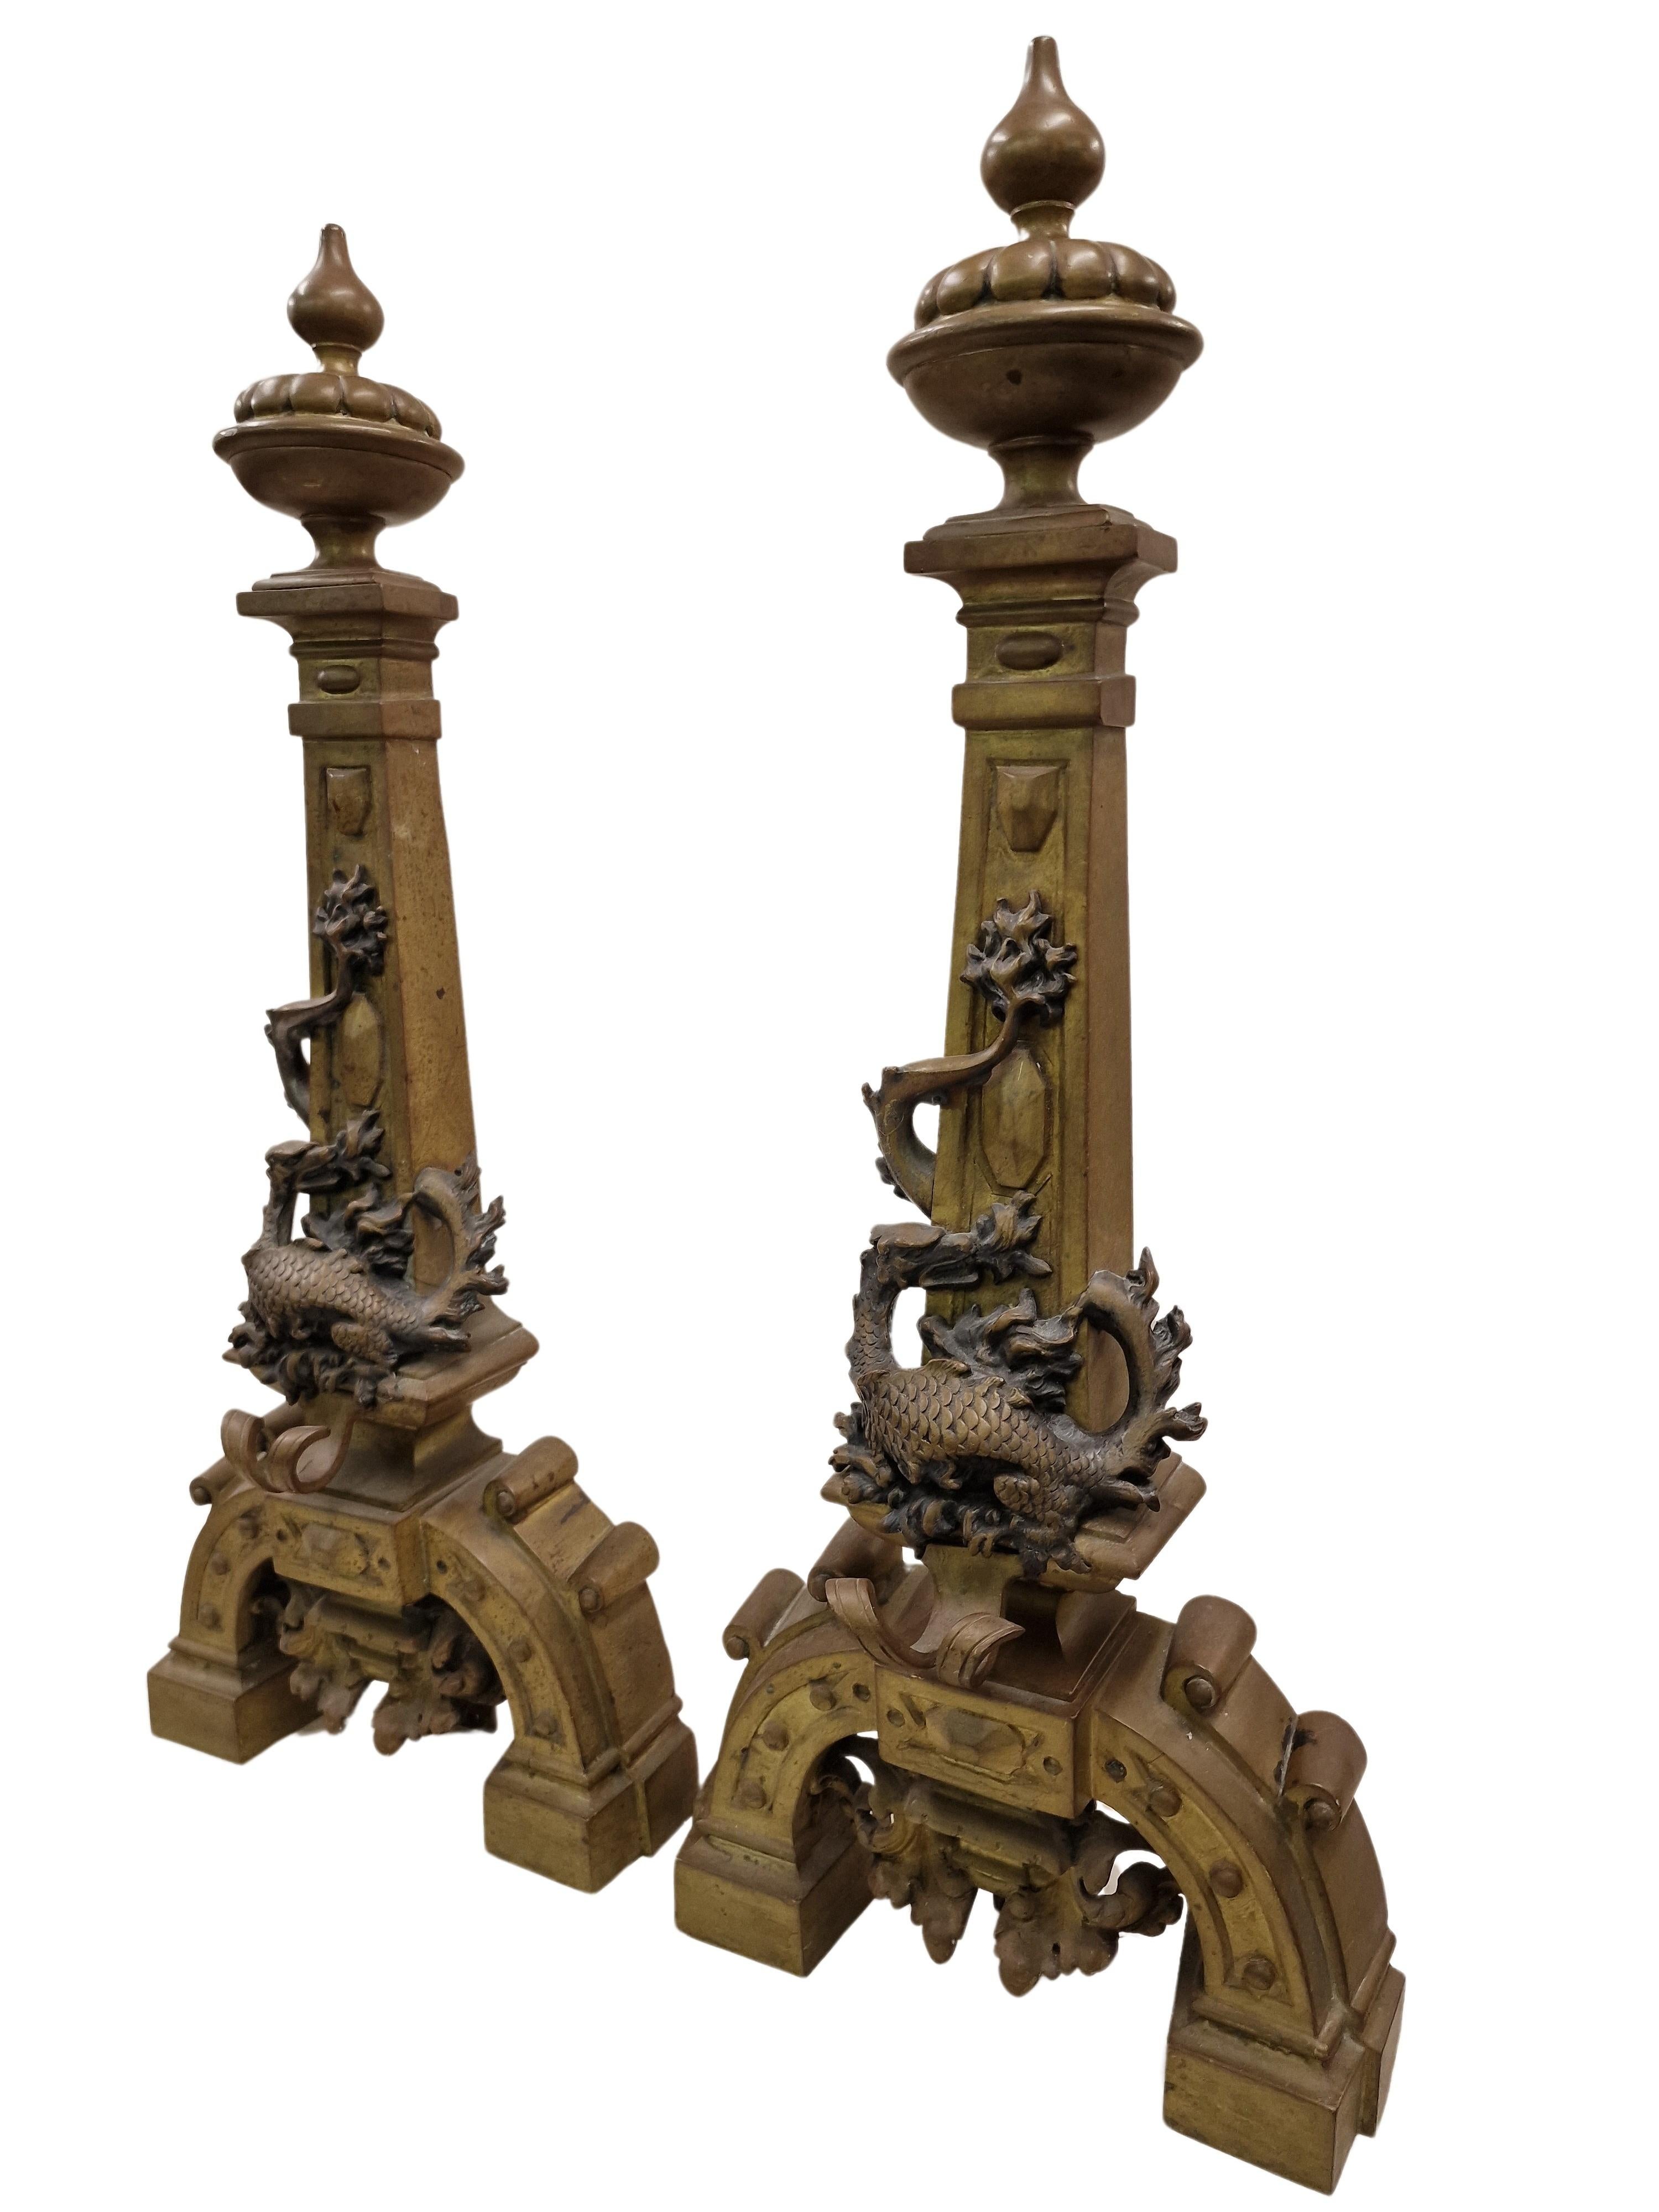 Wonderful pair of fireplace figurines, particularly rare design, made in bronze in the second half of the 19th century, around 1880, in Italy.

These two highly decorative pieces are made from solid bronze. Volutes and tendrils are shown on an